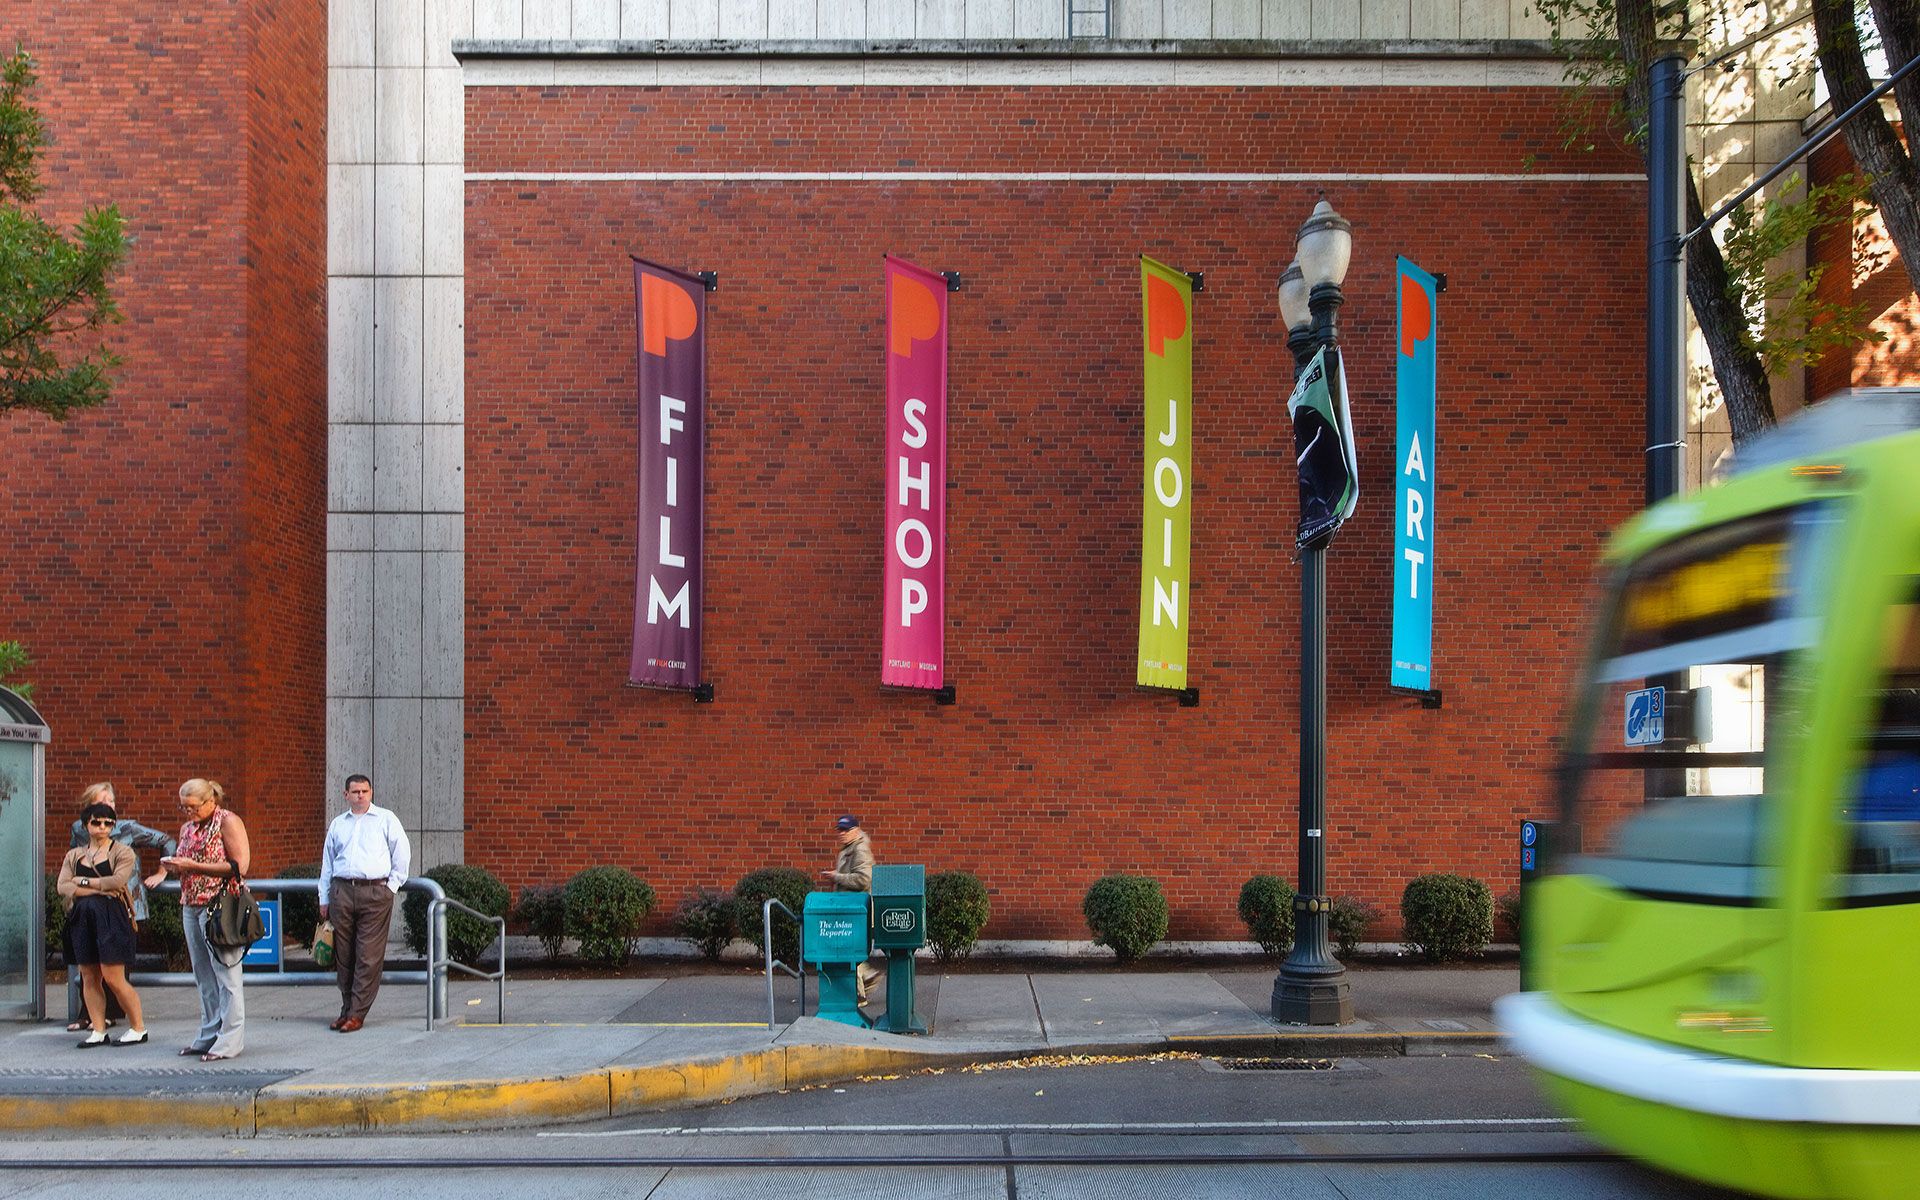 Four Portland Art Museum banners next to a bus stop that read “Film”, “Shop”, “Join”, and “Art”